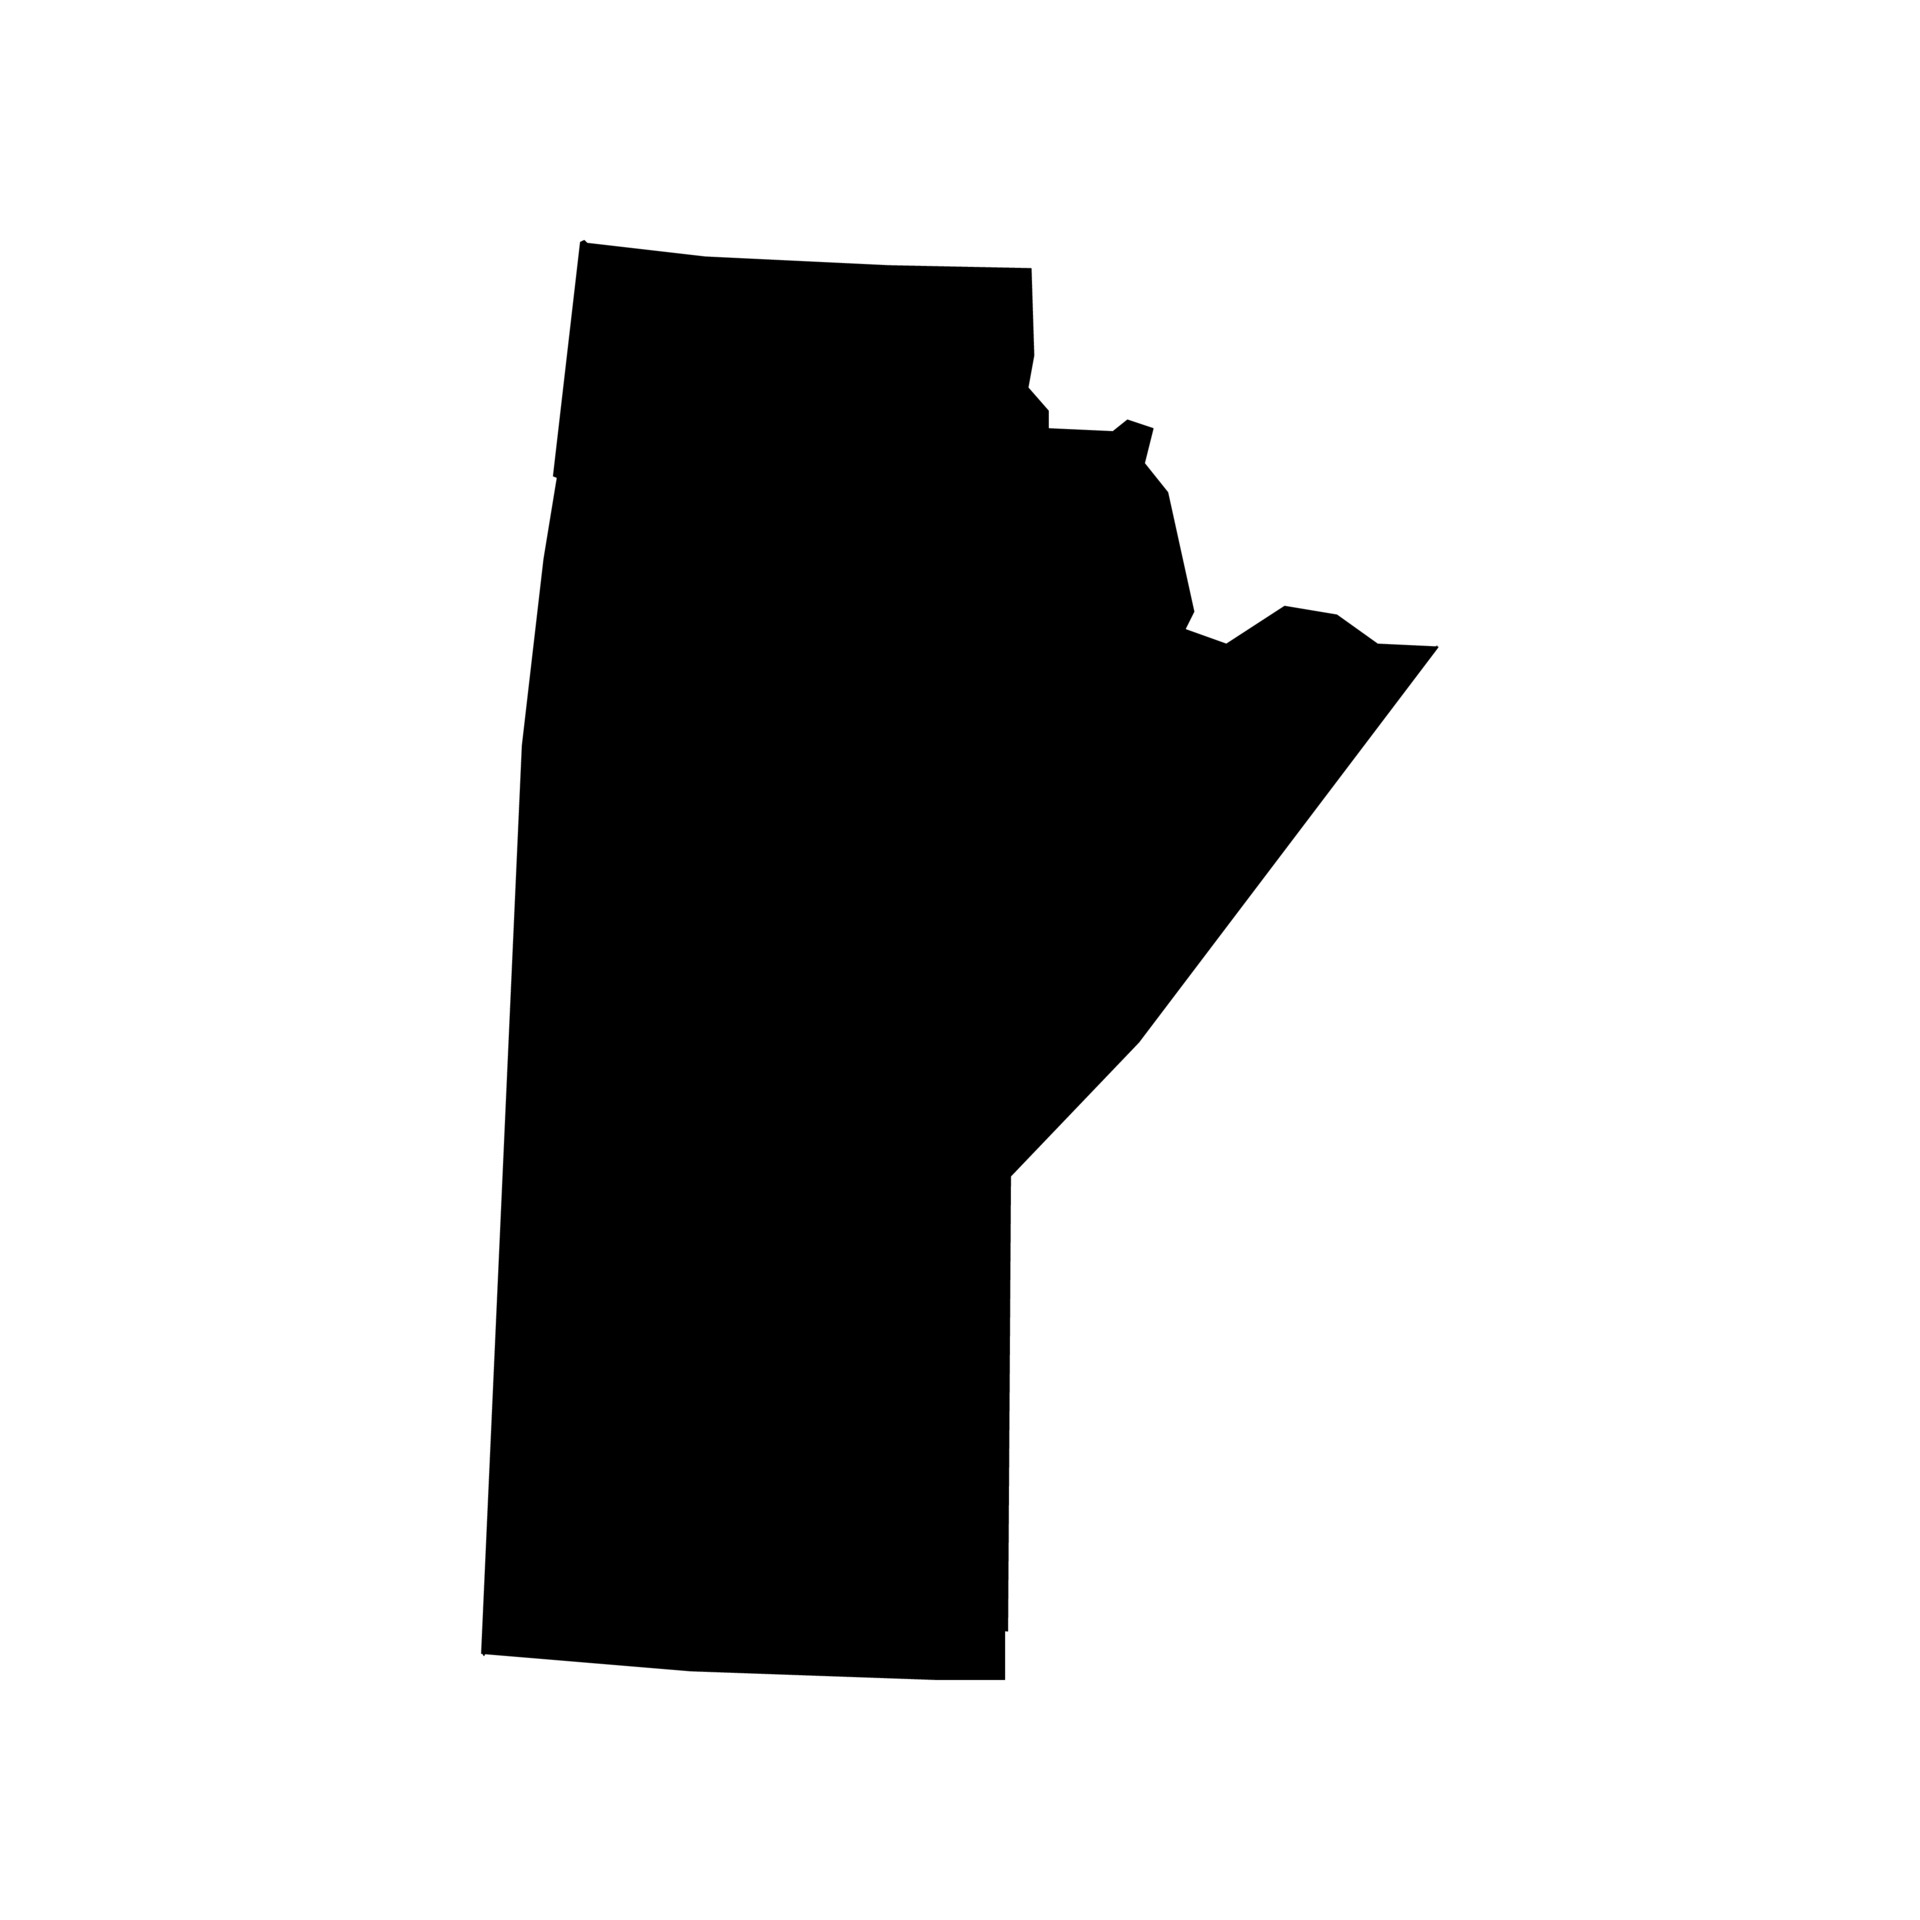 A black silhouette of the state of manitoba